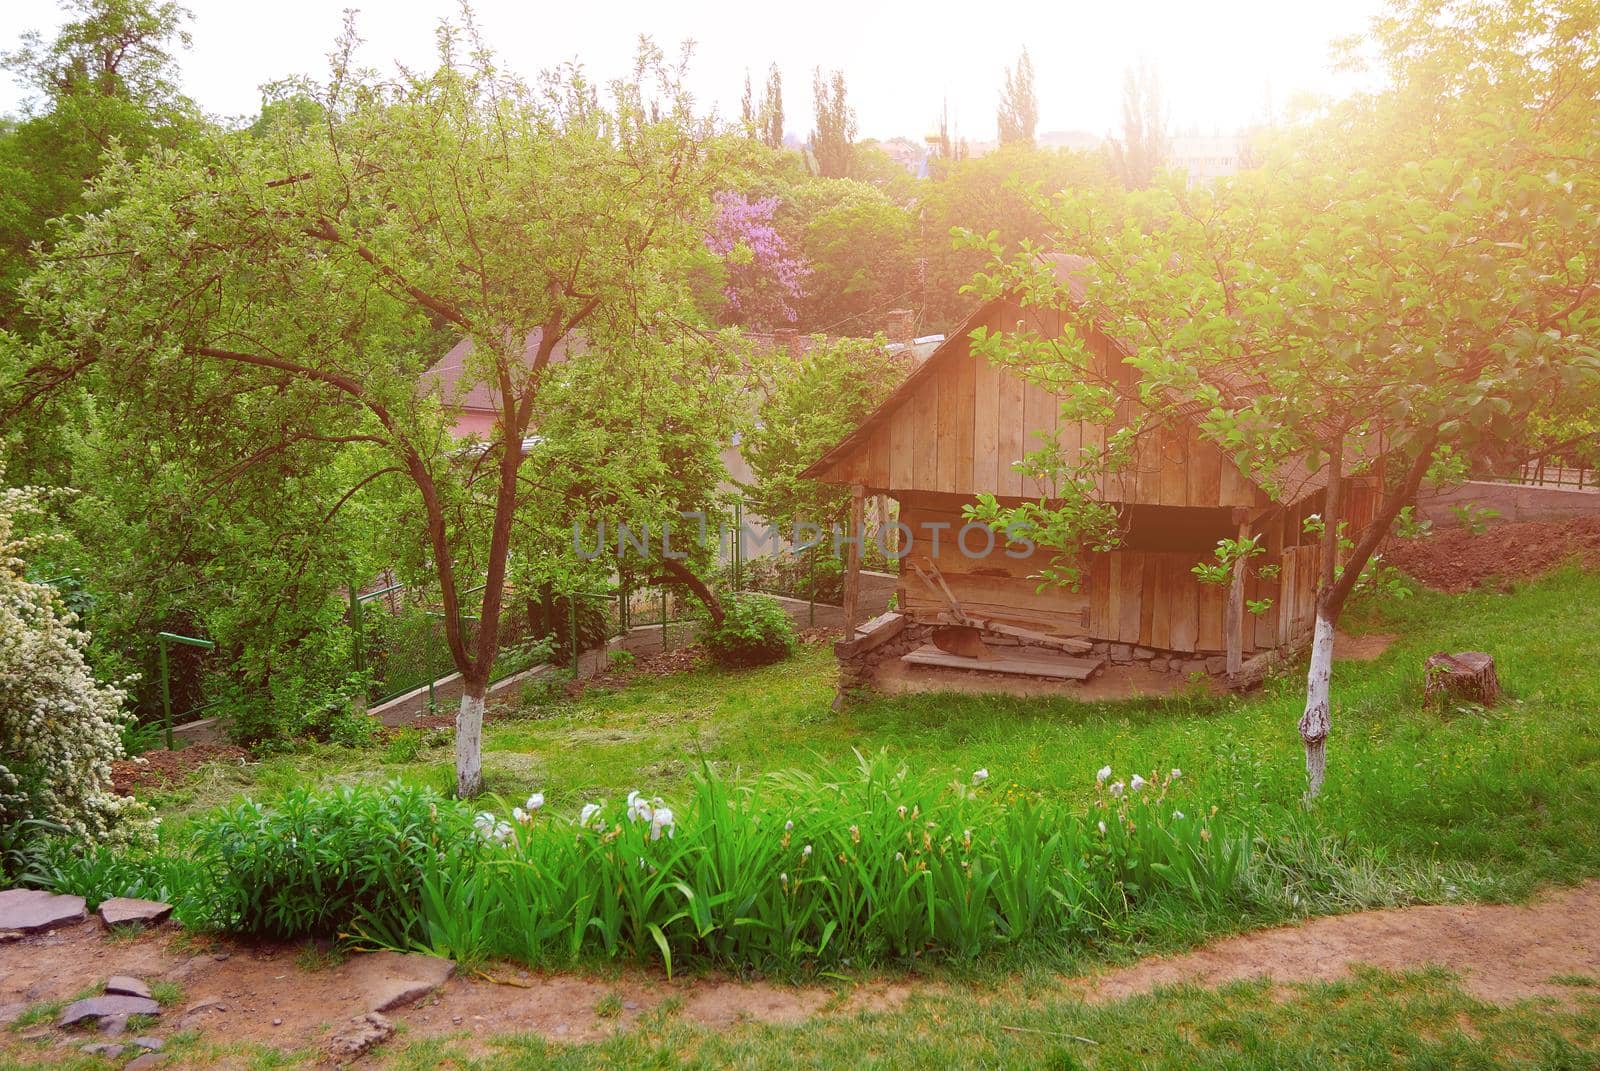 A typical Ukrainian landscape in spring or summer: white clay hut with a straw roof and a tree in the foreground.